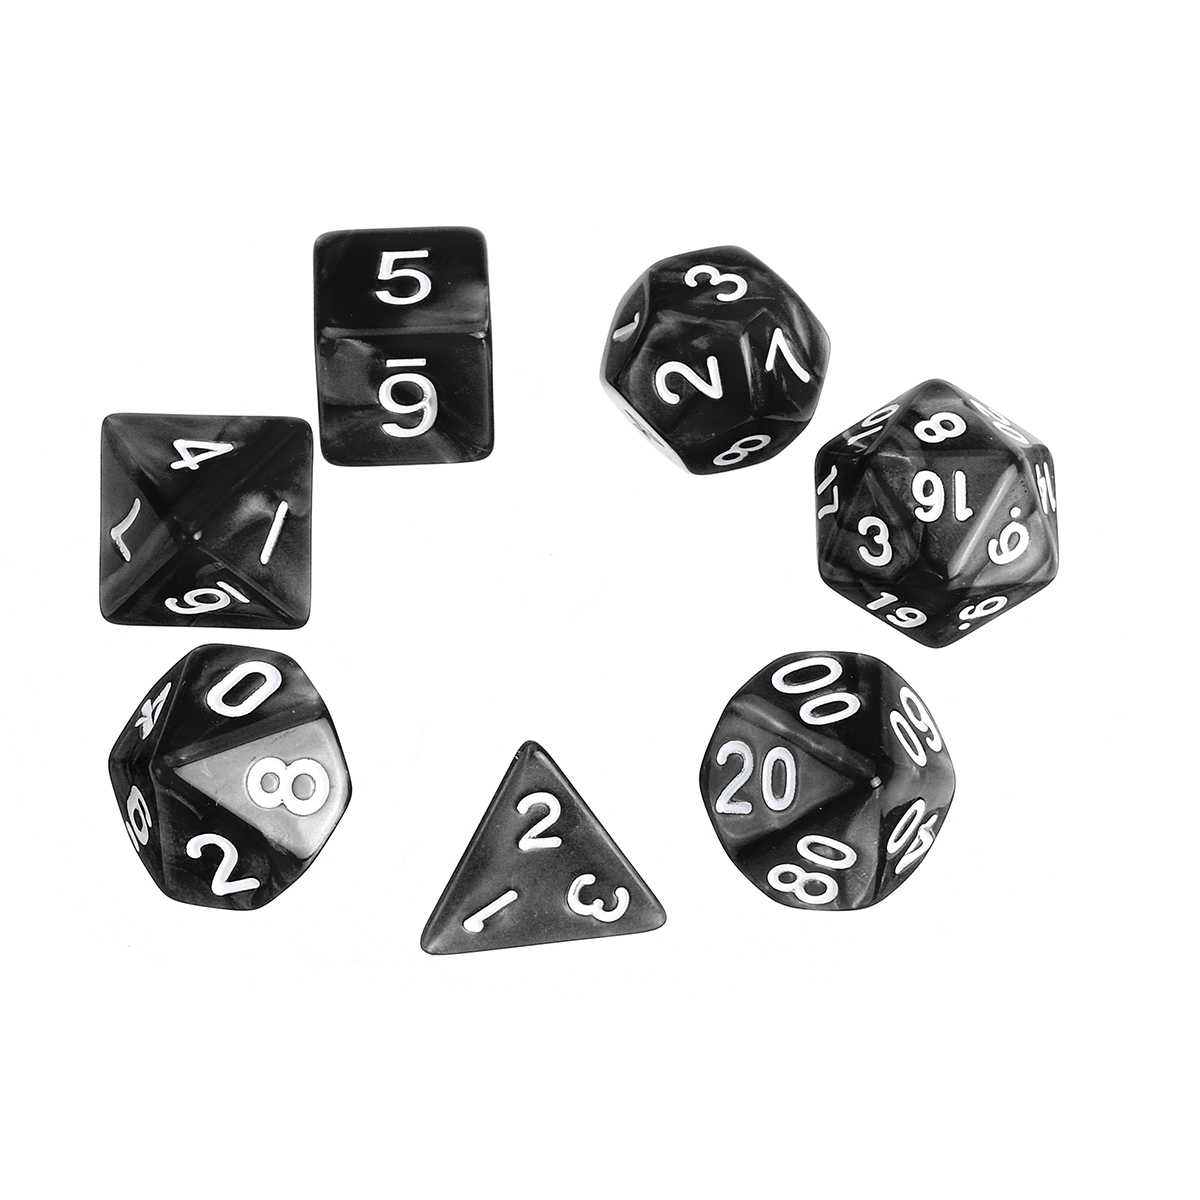 Multisided-Dice-Holder-Polyhedral-Dices-PU-Leather-Folding-Rectangle-Tray-for-RPG-1372549-9